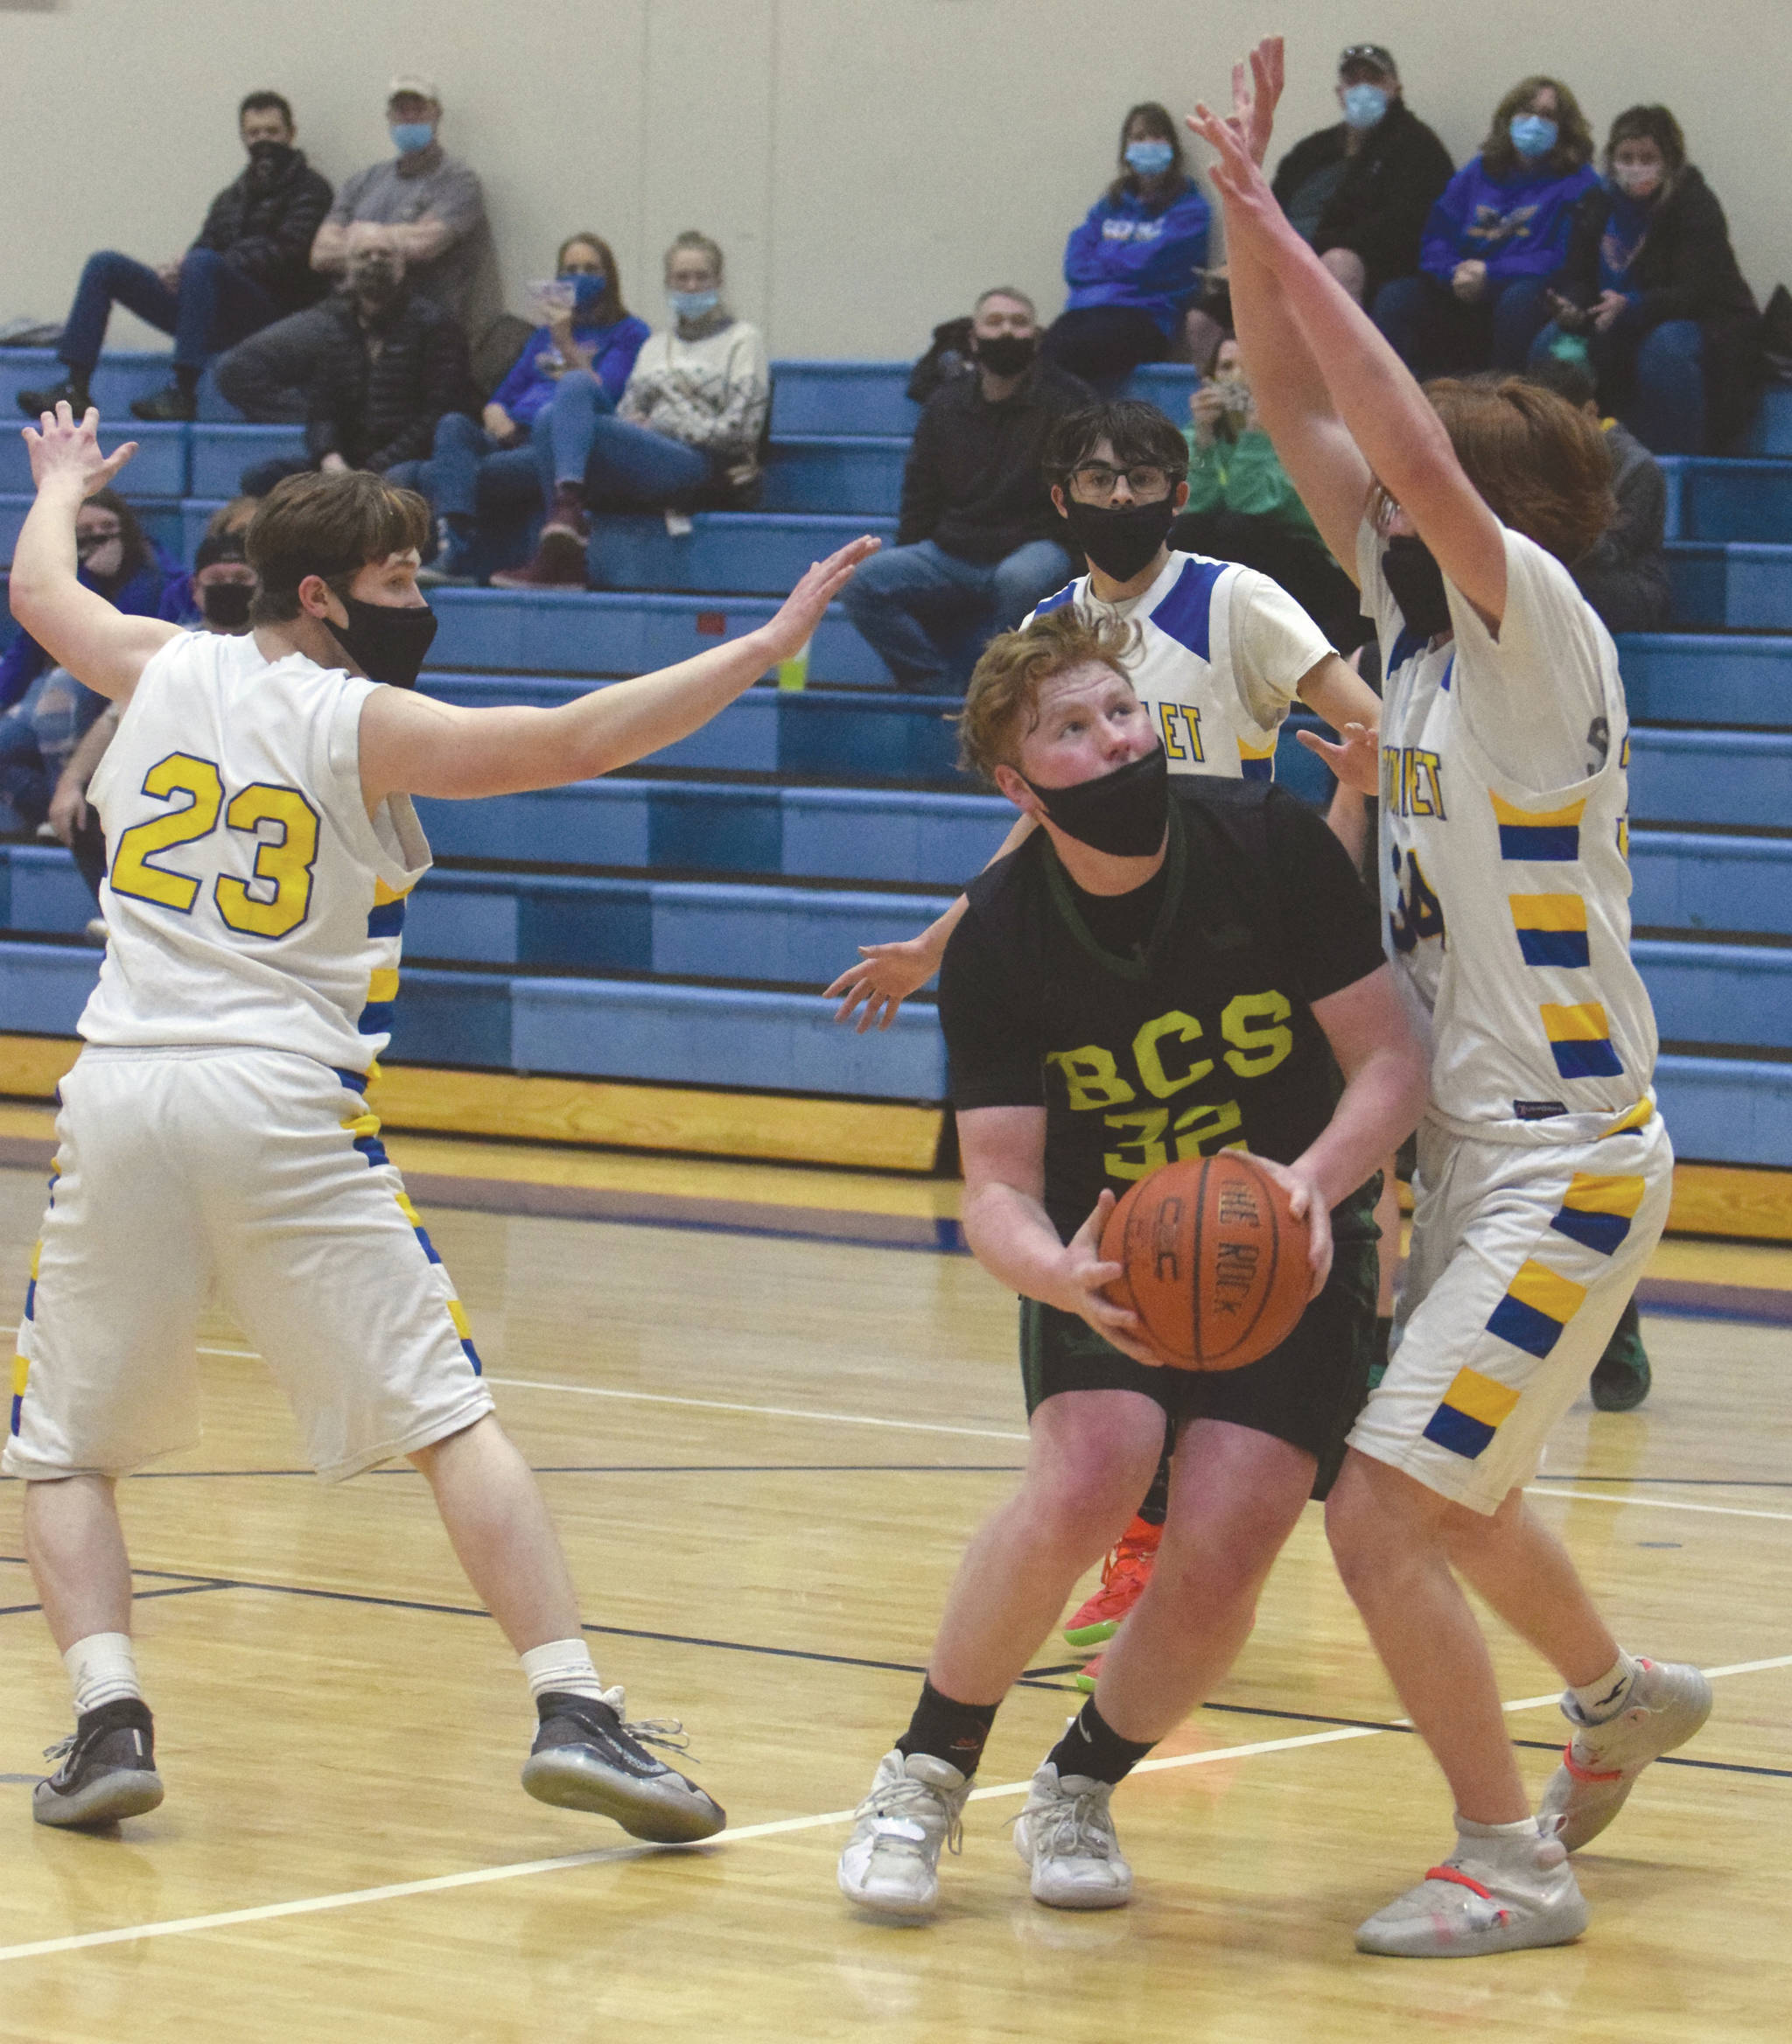 Birchwood Christian’s Jackson Hanson drives to the basket against Cook Inlet Academy’s Grizzly Beard and Mason Zeigler on Thursday, March 18, 2021, in the Peninsula Conference tournament at Soldotna High School in Soldotna, Alaska. (Photo by Jeff Helminiak/Peninsula Clarion)